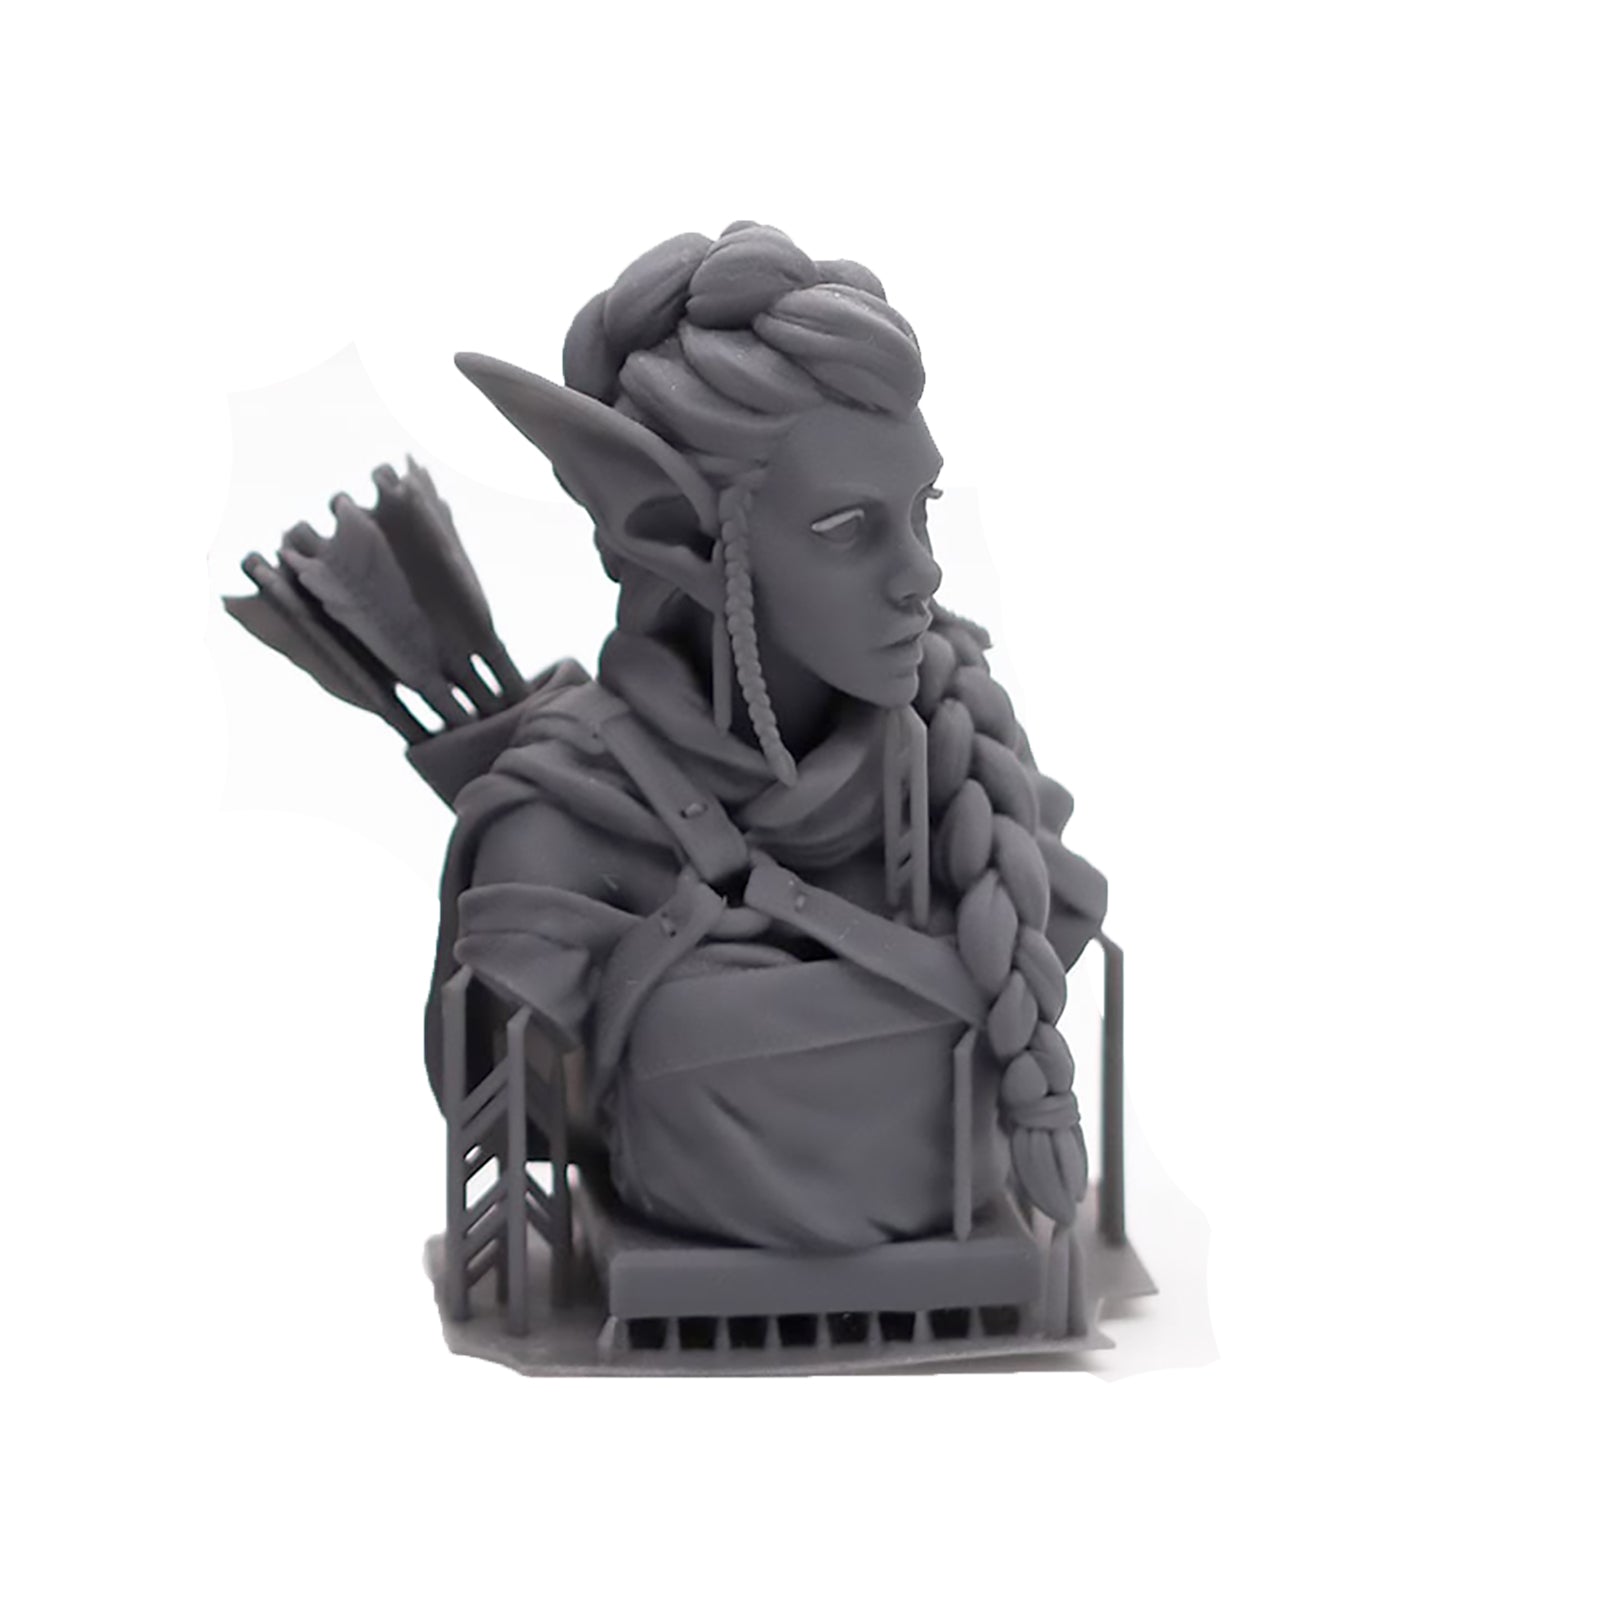 Form 3d resin for printers is an affordable general model resin for laser SLA resin printers like Formlabs printers and Peopoly Moai. It is formulated to work with both PDMS and FEP vat commonly found on laser printers. The Form resin offers great resolution and surface finish while it is easy to print using the suggested setting.